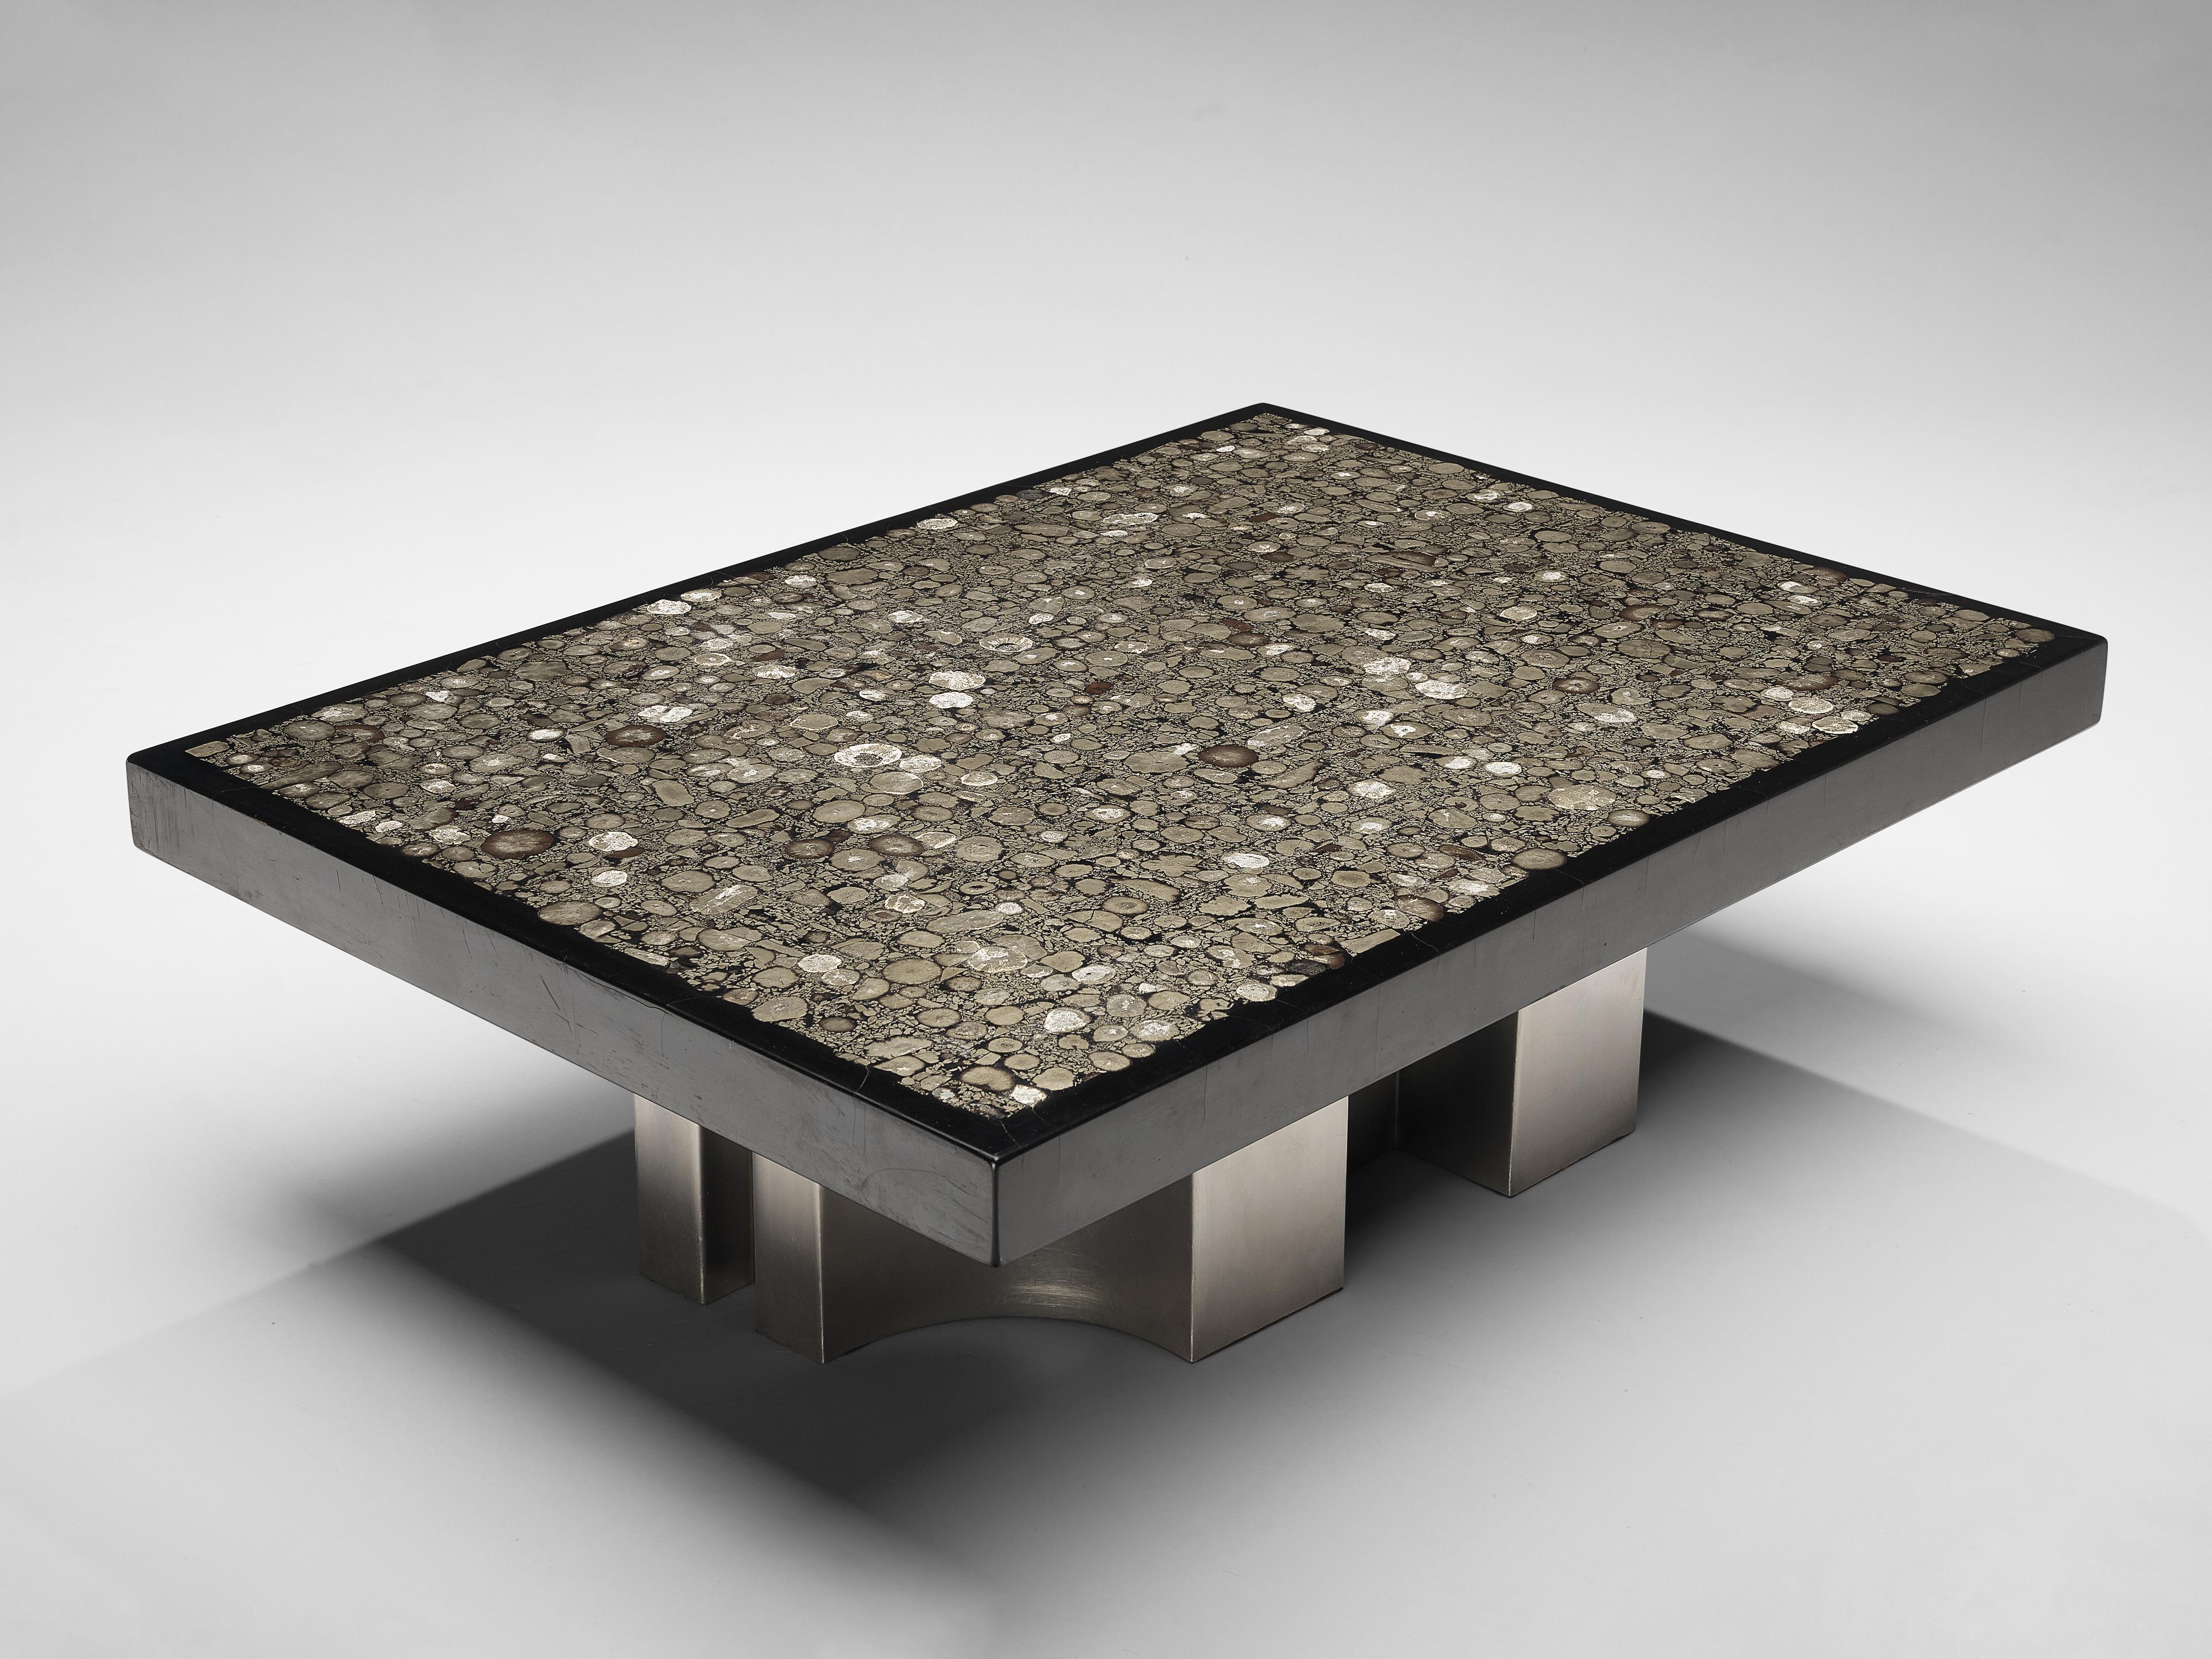 Jean Claude Dresse, large coffee table, marcasite, wood, steel, Belgium, 1970s 

This coffee table was crafted with great eye for proportions and detail, typical for the work of Dresse. The luxurious character of the marcasite inlay emphasizes the